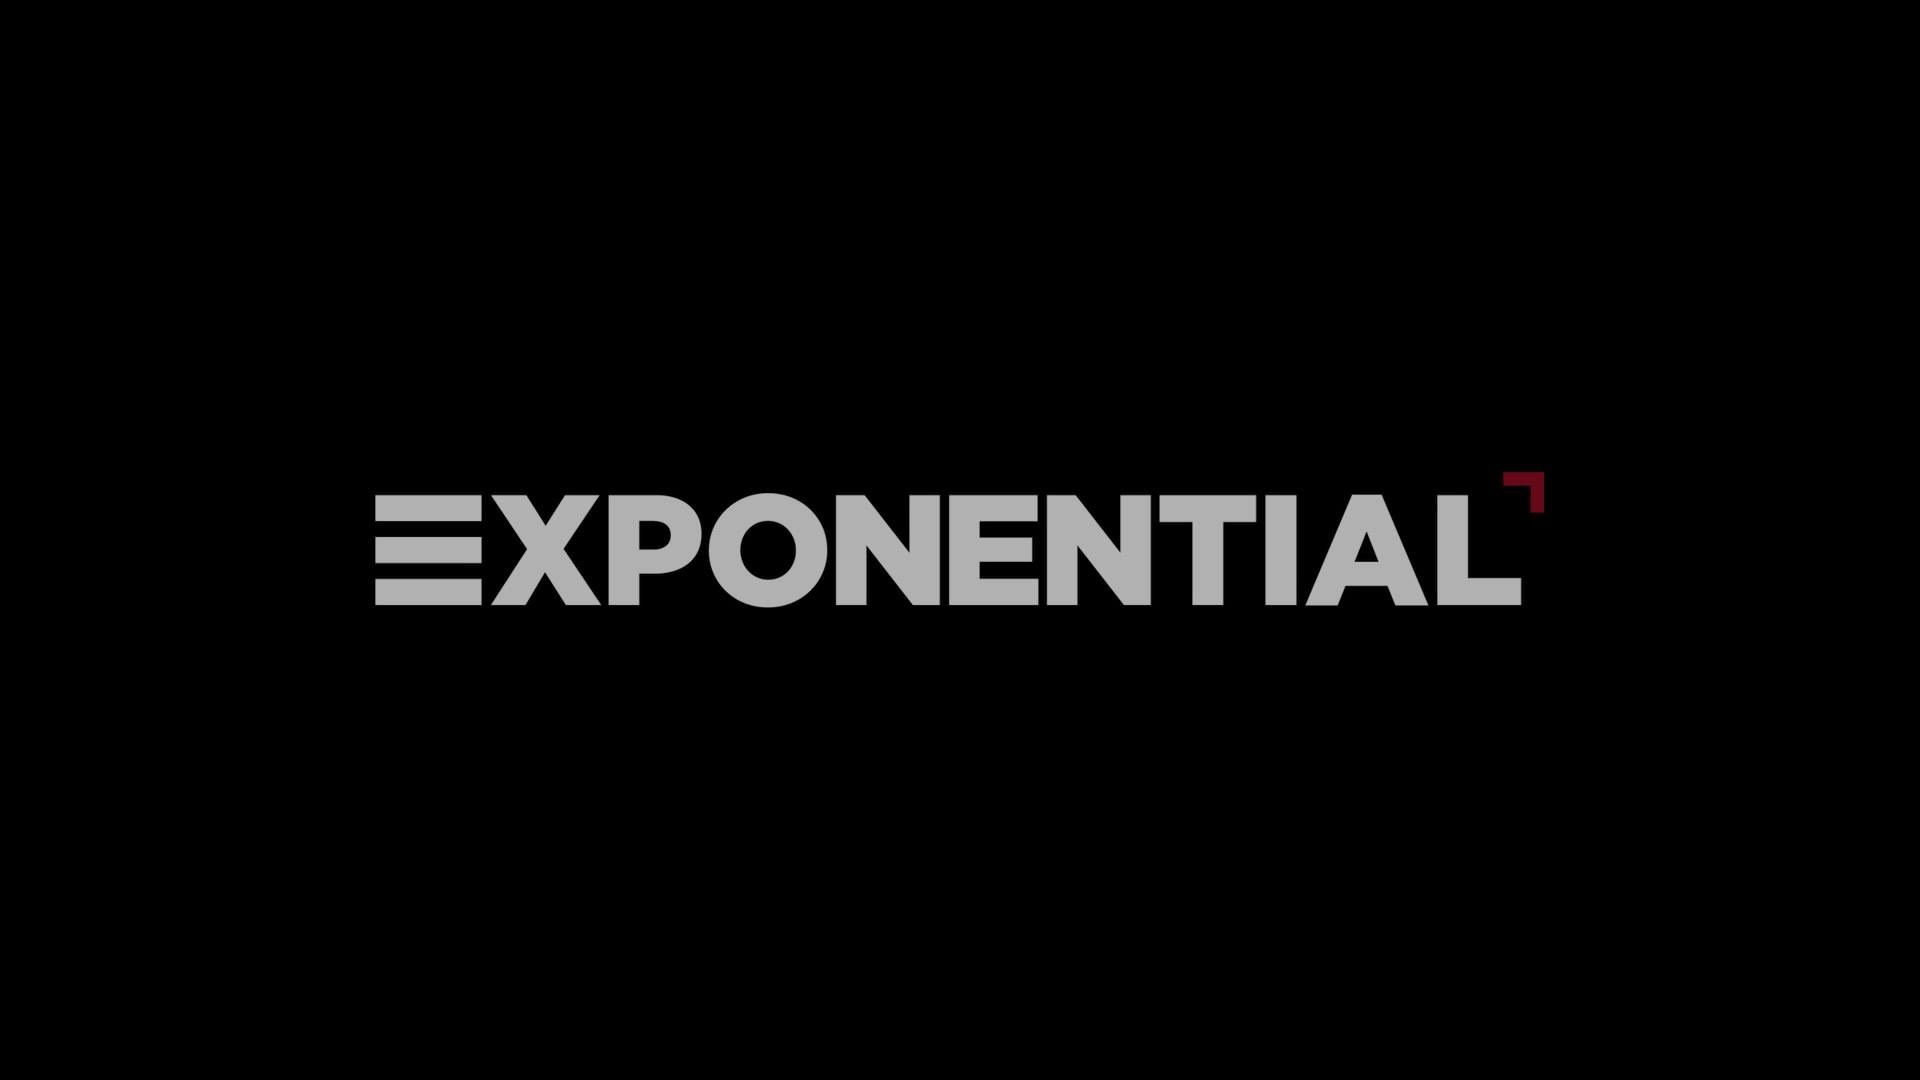 Here are the Digital & Metaverse Tracks for Exponential Orlando 2023